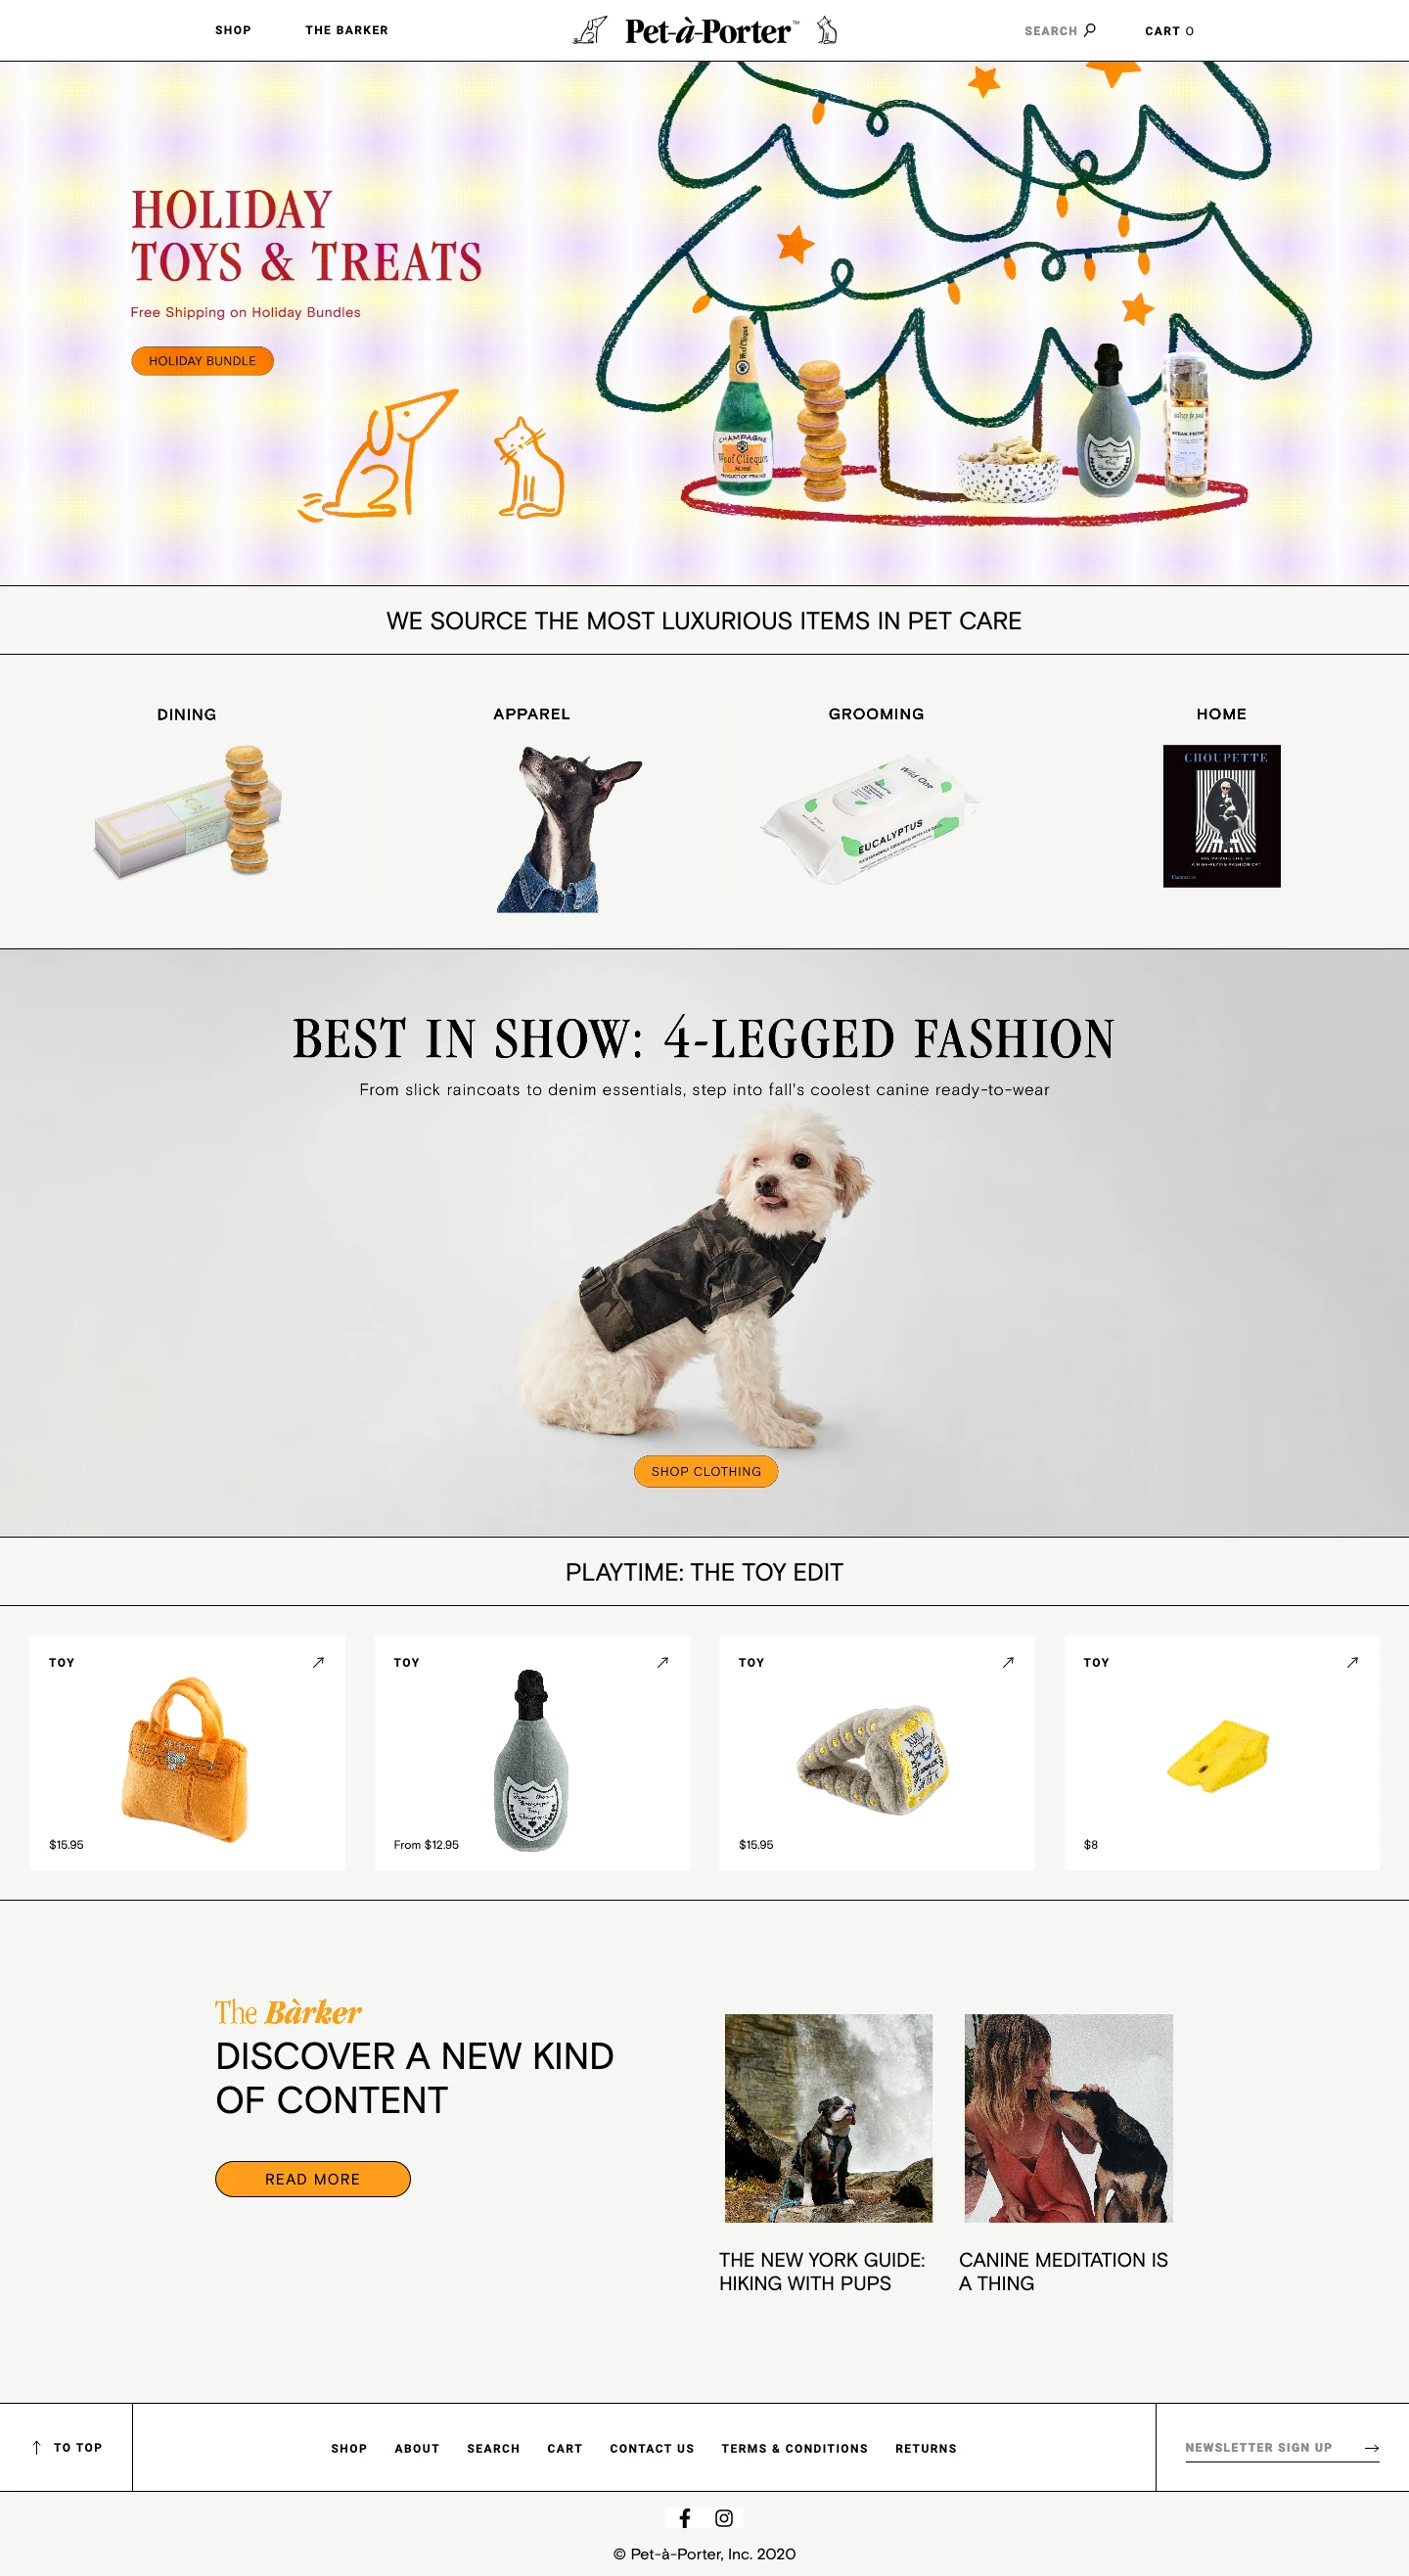 Pet-à-Porter Landing Page Example: Shop Pet-à-Porter for curated designer dog and cat goods ranging from treats, toys, grooming, collars, leashes and more.